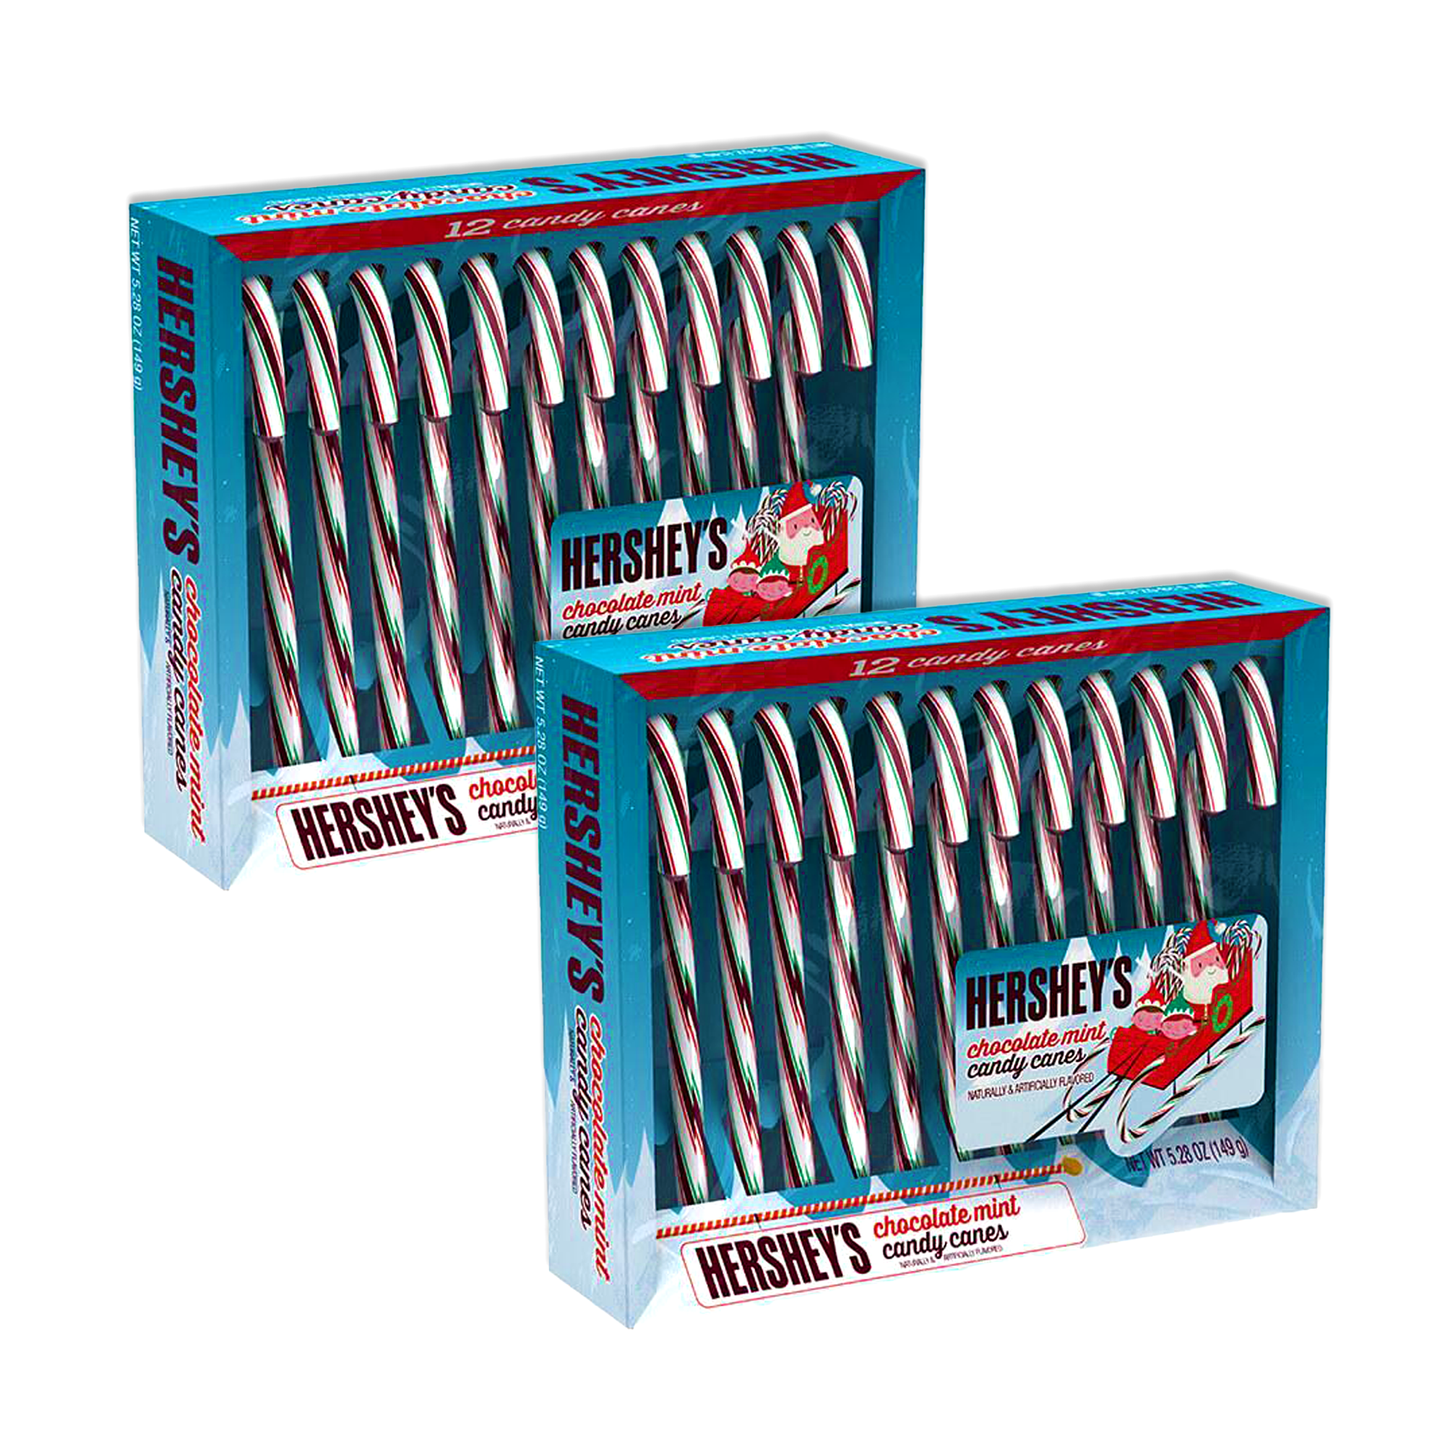 Hersheys Mint Chocolate Candy Canes 2 Packs of 12 Candy Canes. Hershey ...